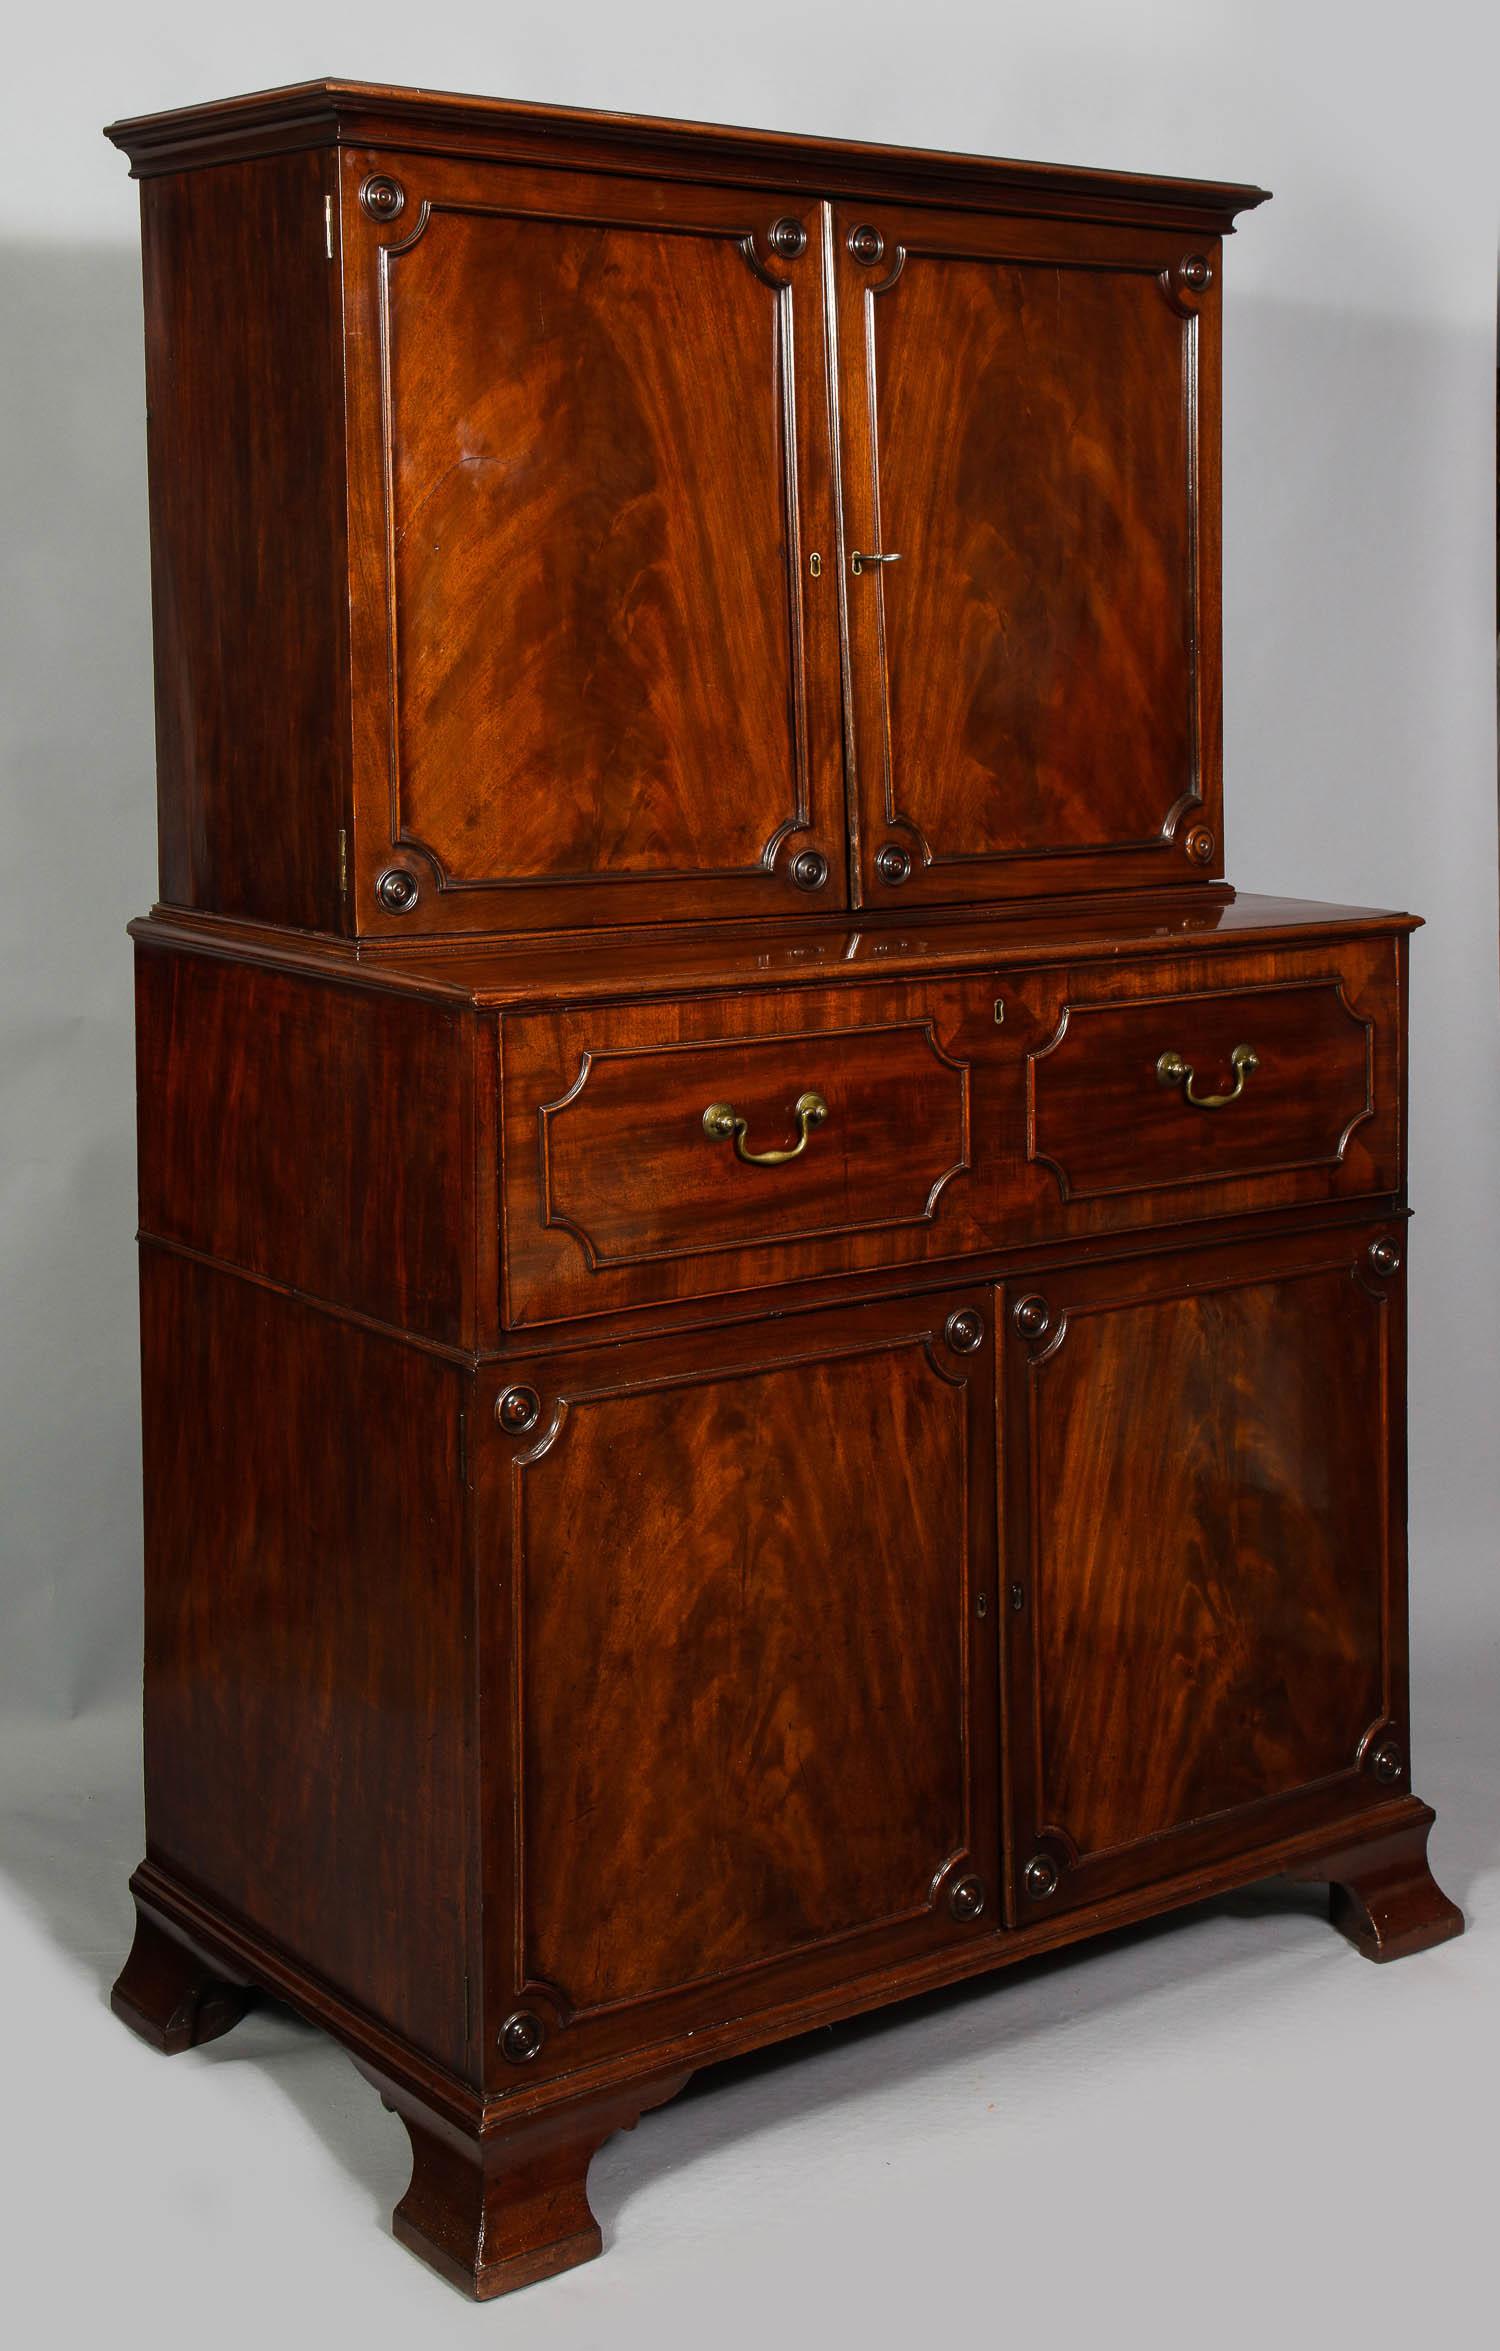 The Paxton House Secretaire, circa 1775

A George III mahogany secretaire in two parts, the upper case with vividly grained doors concealing 24 pigeonholes over four drawers, the lower section with pullout secretary drawer with interior comprising